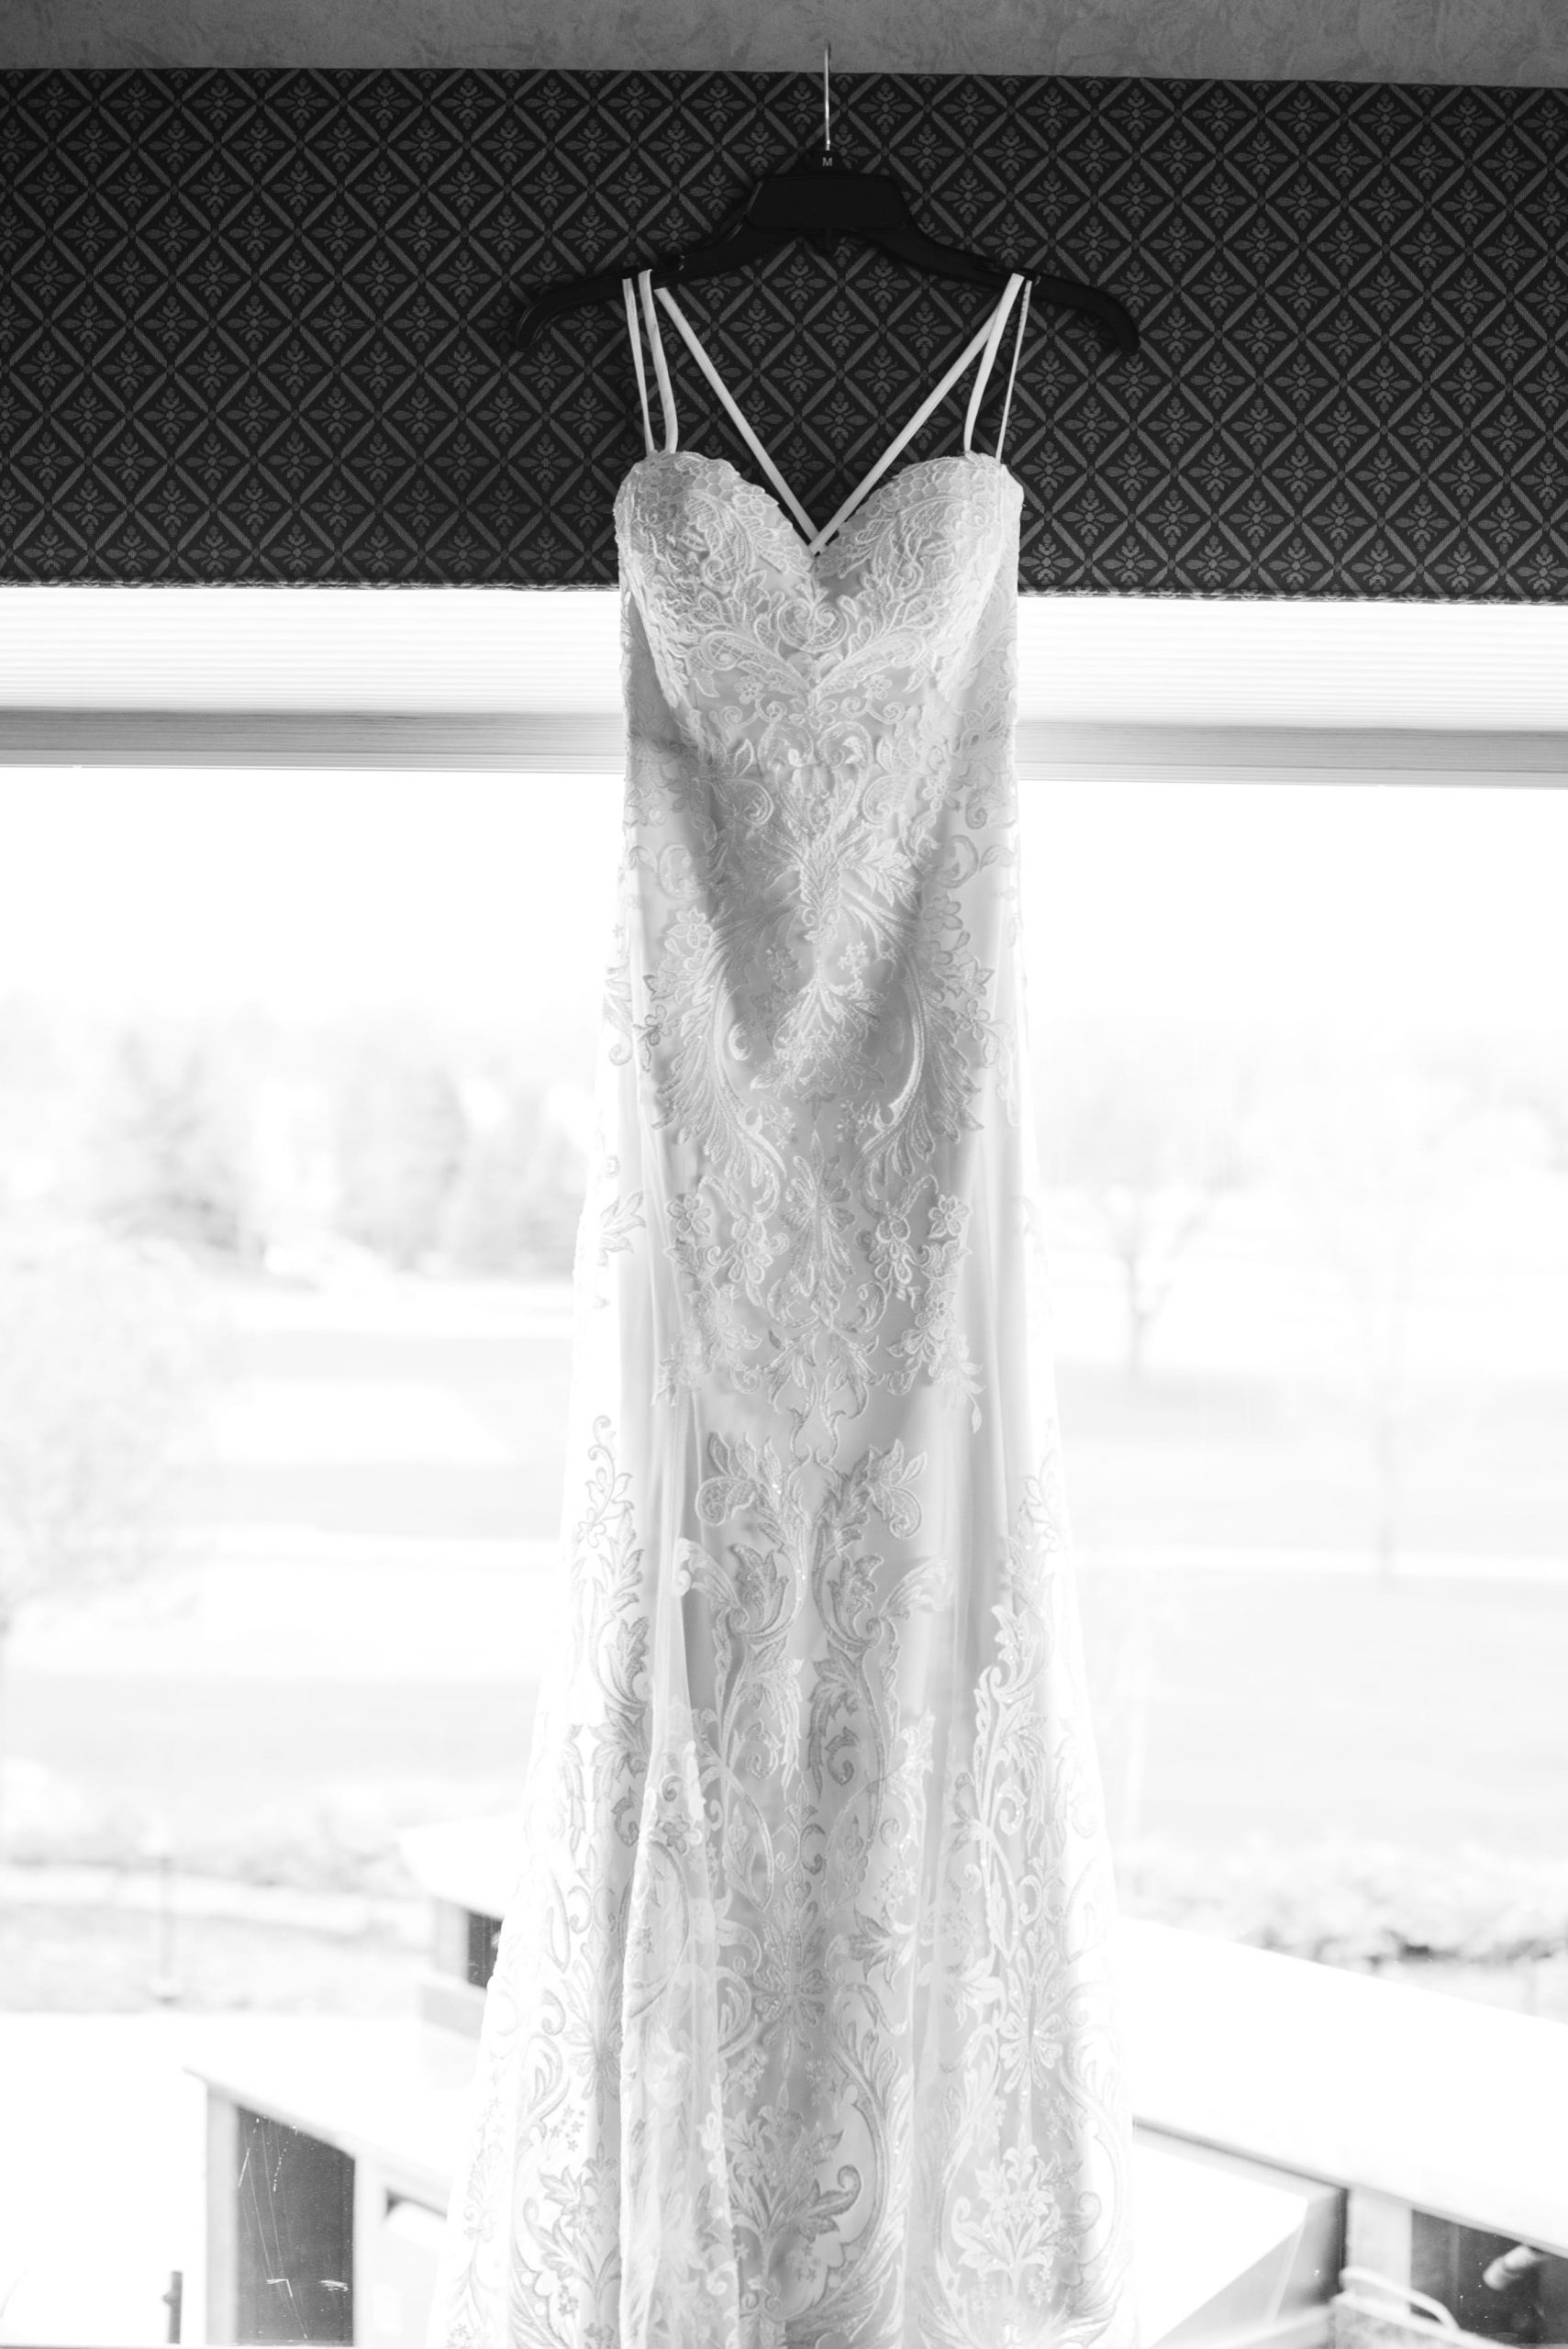 dress hanging from window